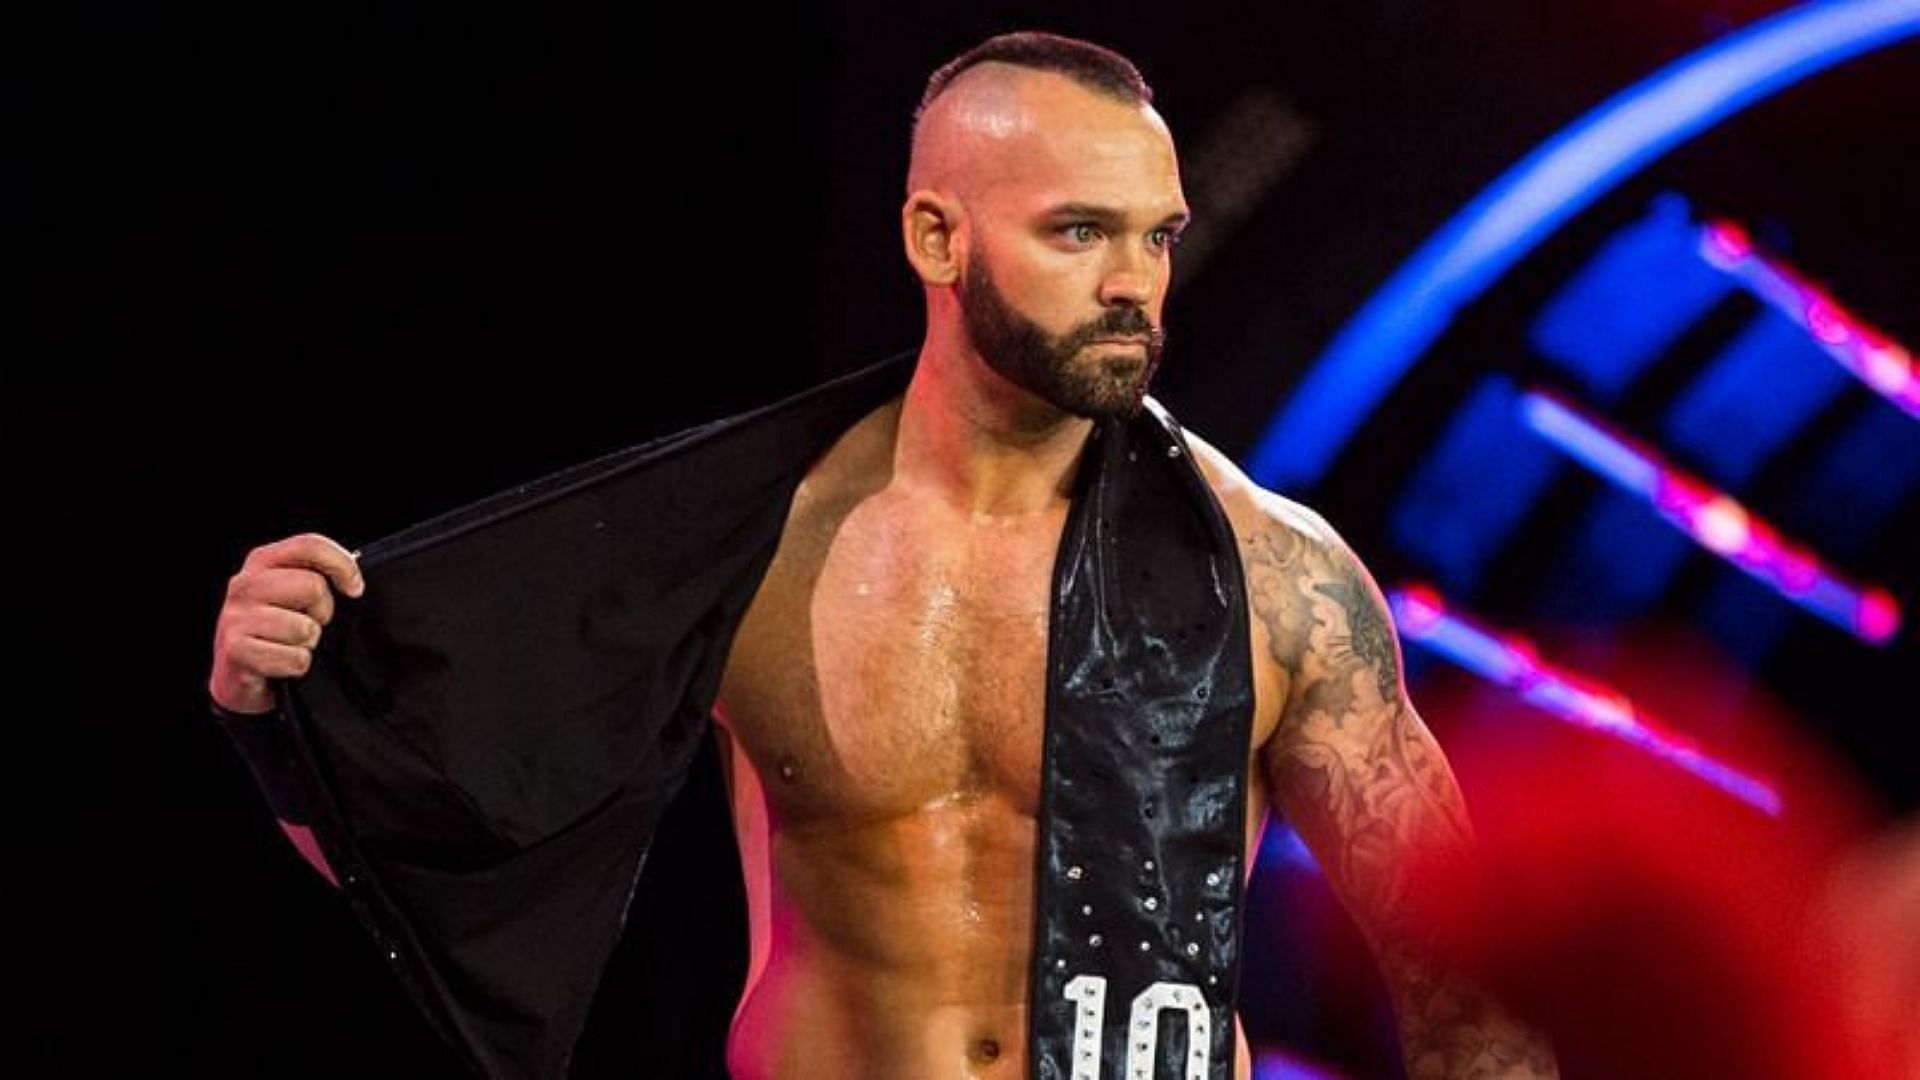 Shawn Spears is part of The Pinnacle in AEW